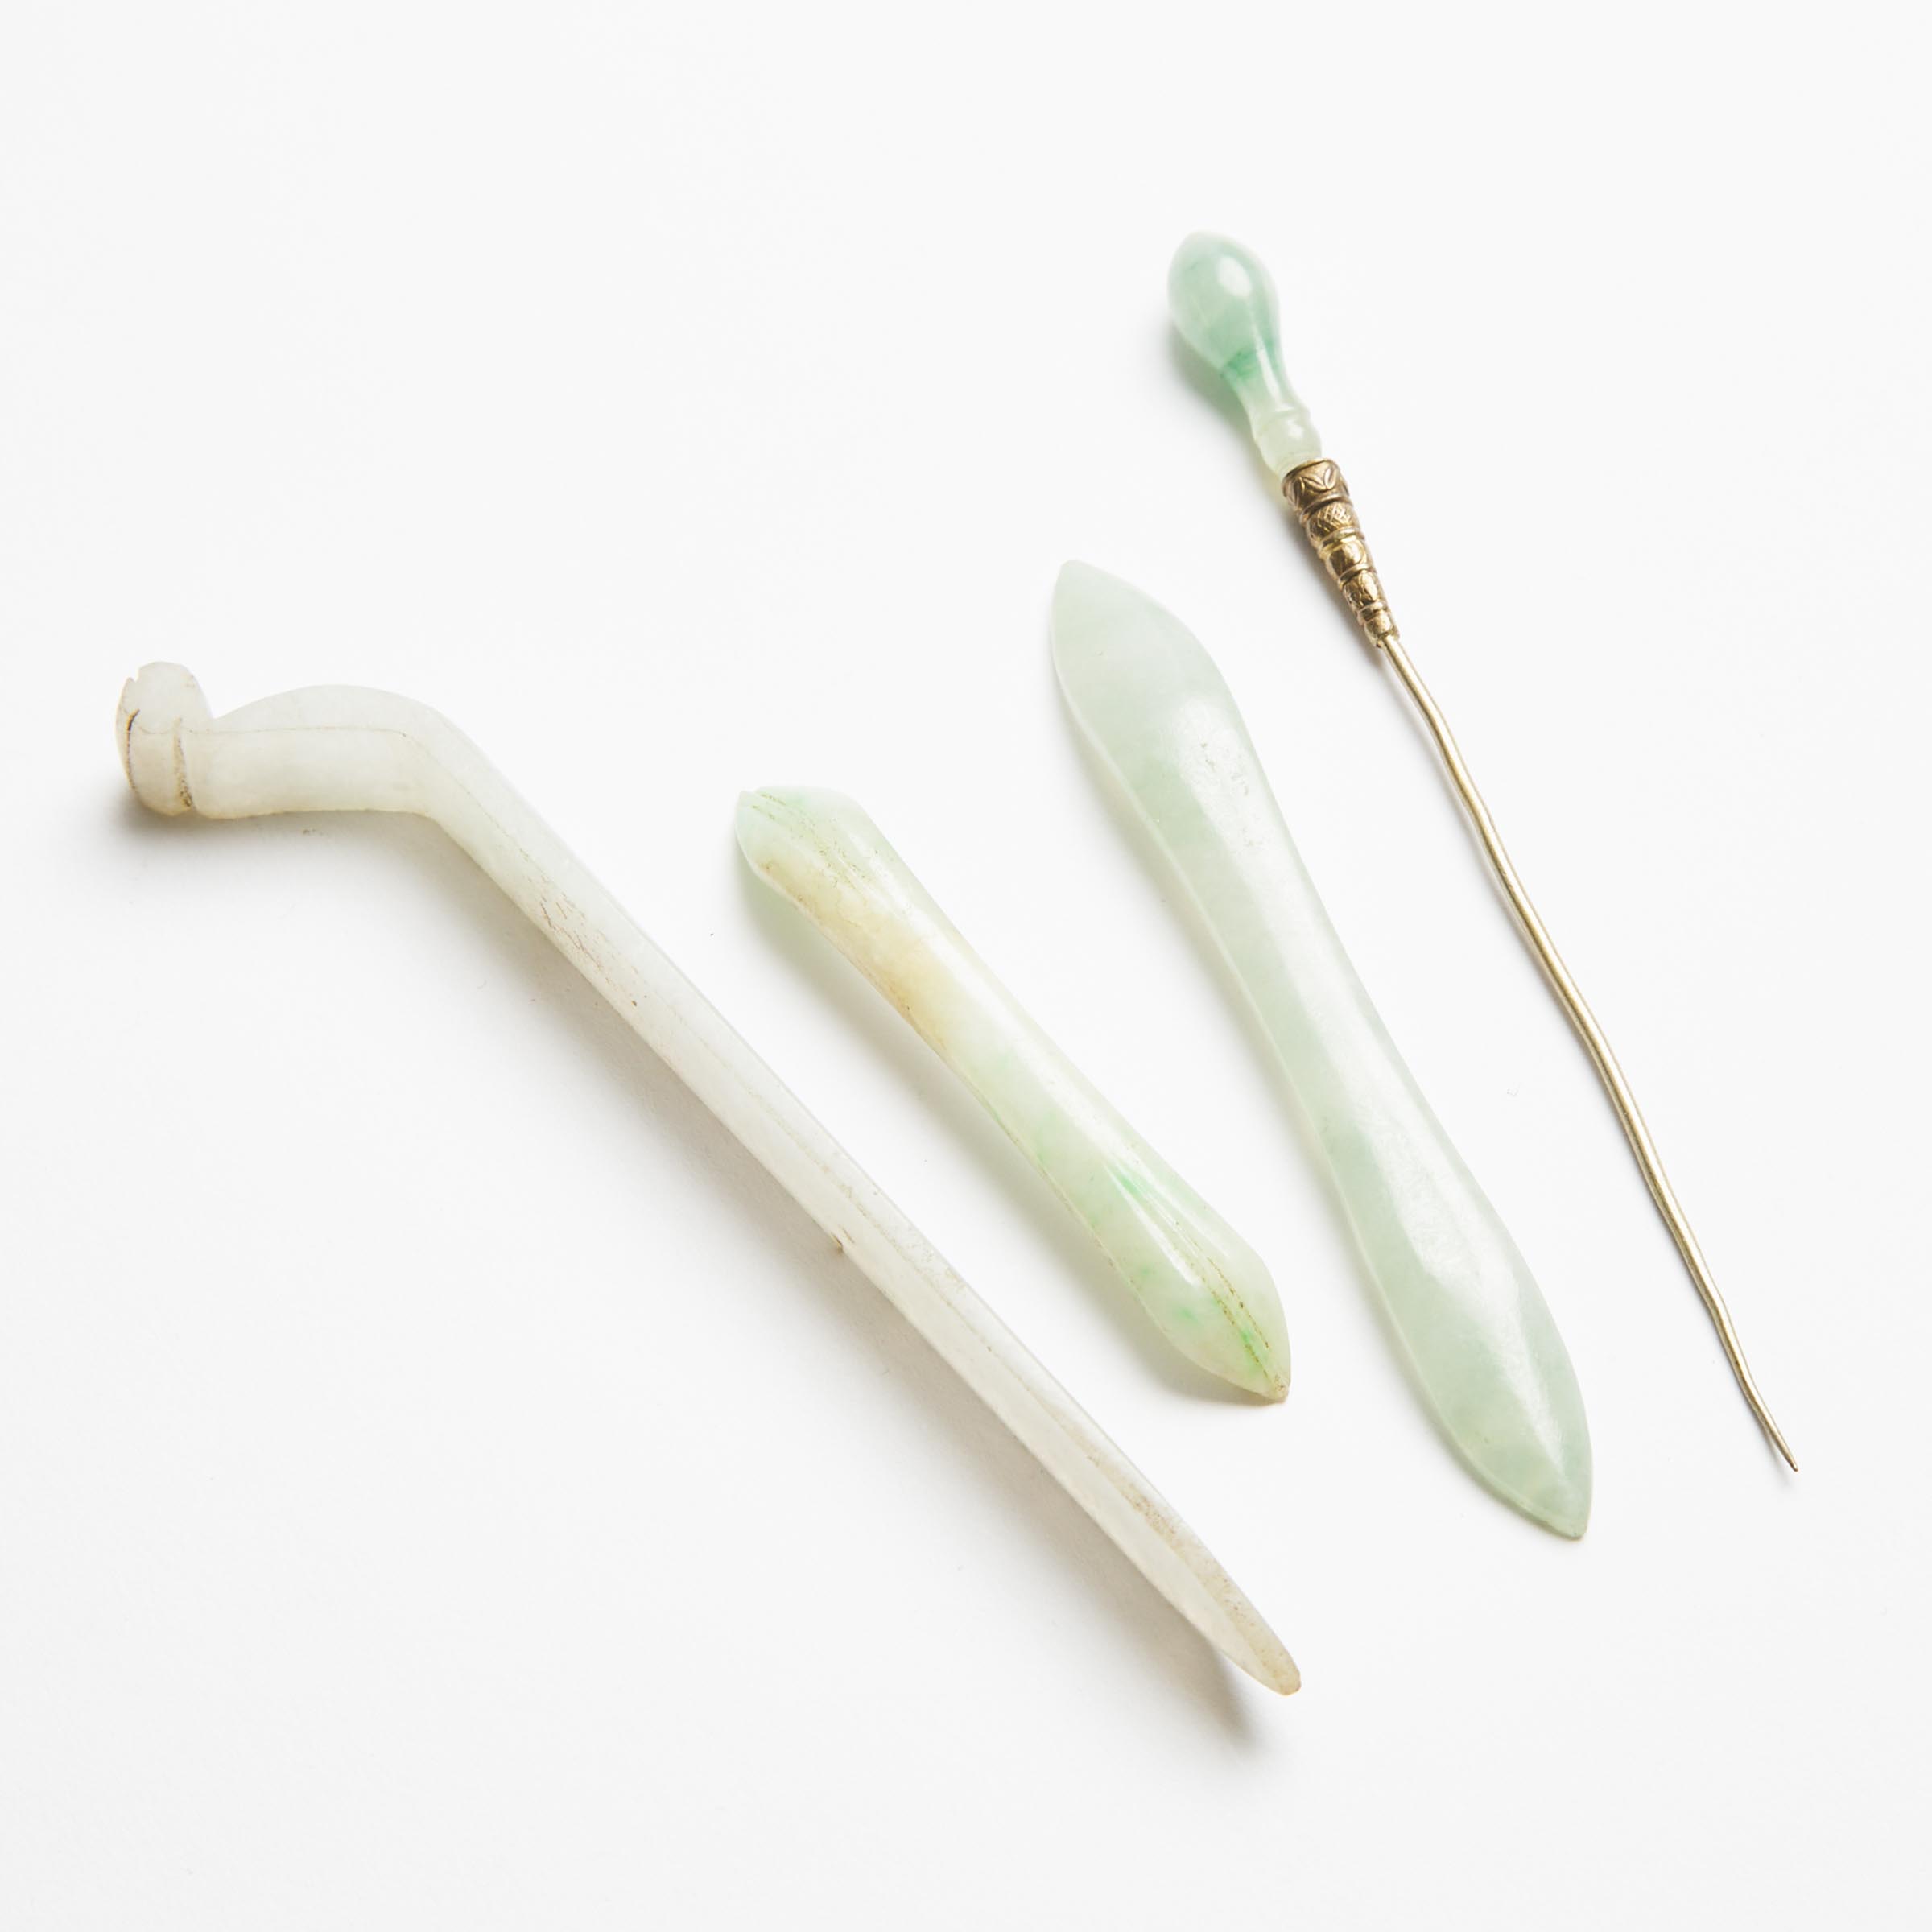 A Group of Four Jade and Jadeite Hair Pins, 19th Century